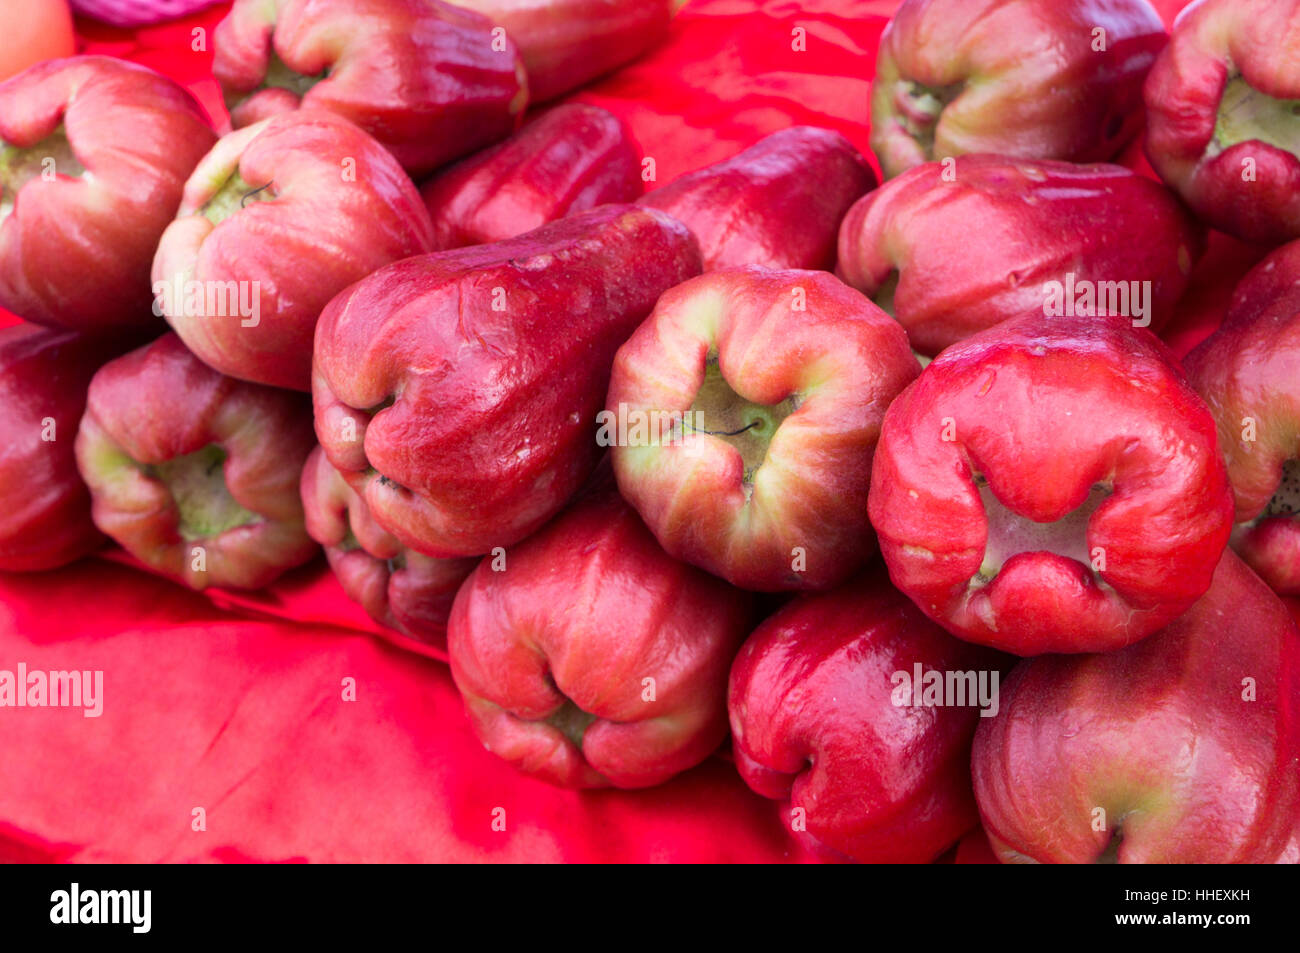 The tropical fruit wax apples on the open market Stock Photo